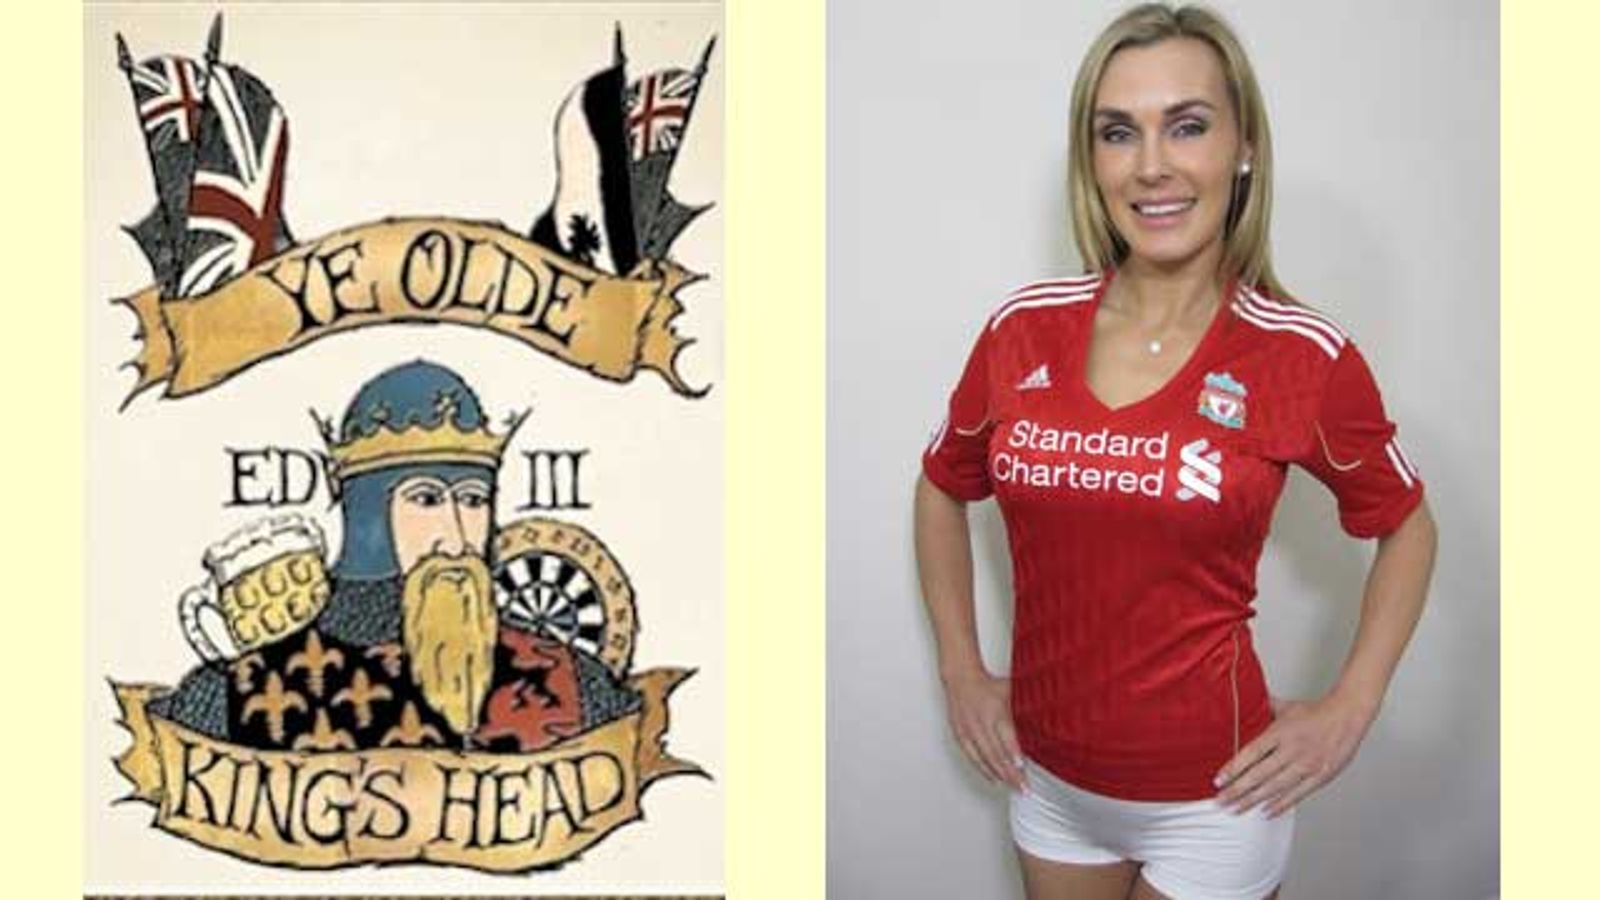 Liverpudlian Tanya Tate to Support Hometown Team February 26th